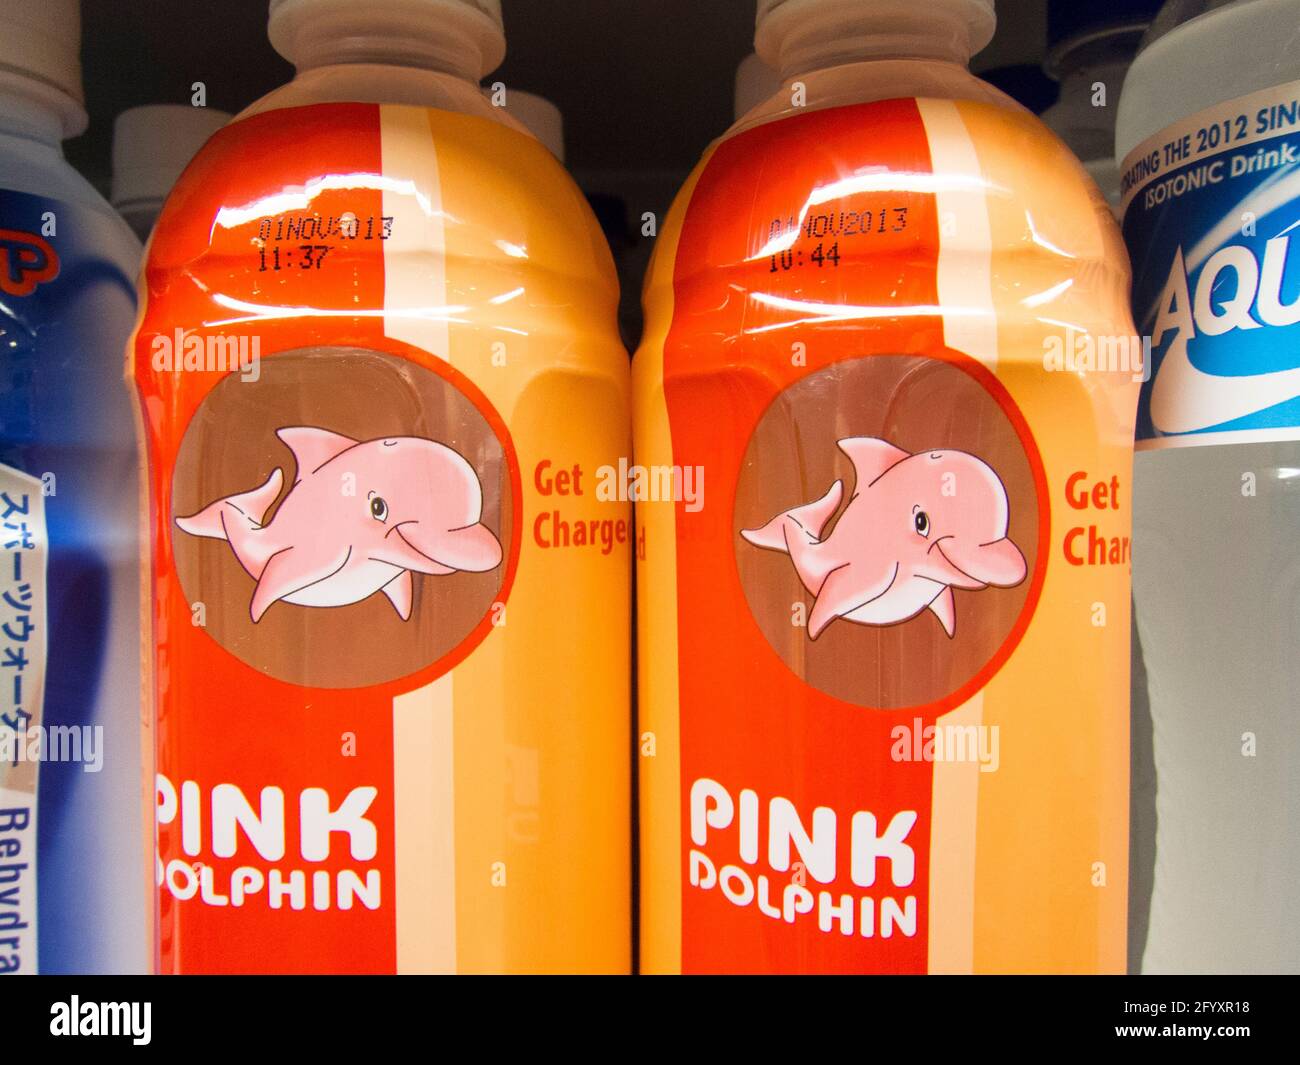 Detail of water bottles of Veo's Pink Dolphin energy drink at a grocery store. In Singapore. Stock Photo